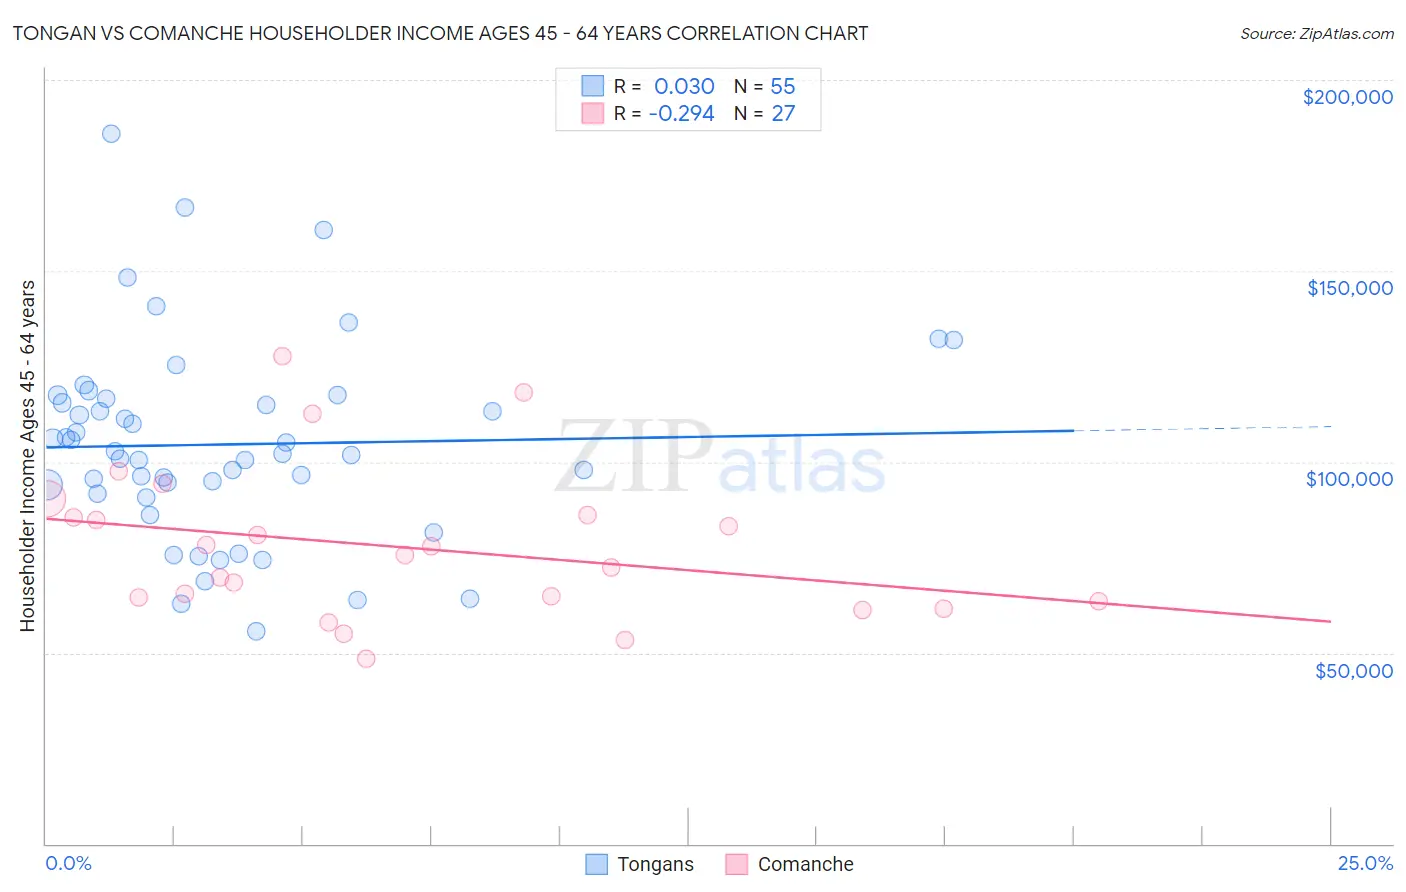 Tongan vs Comanche Householder Income Ages 45 - 64 years